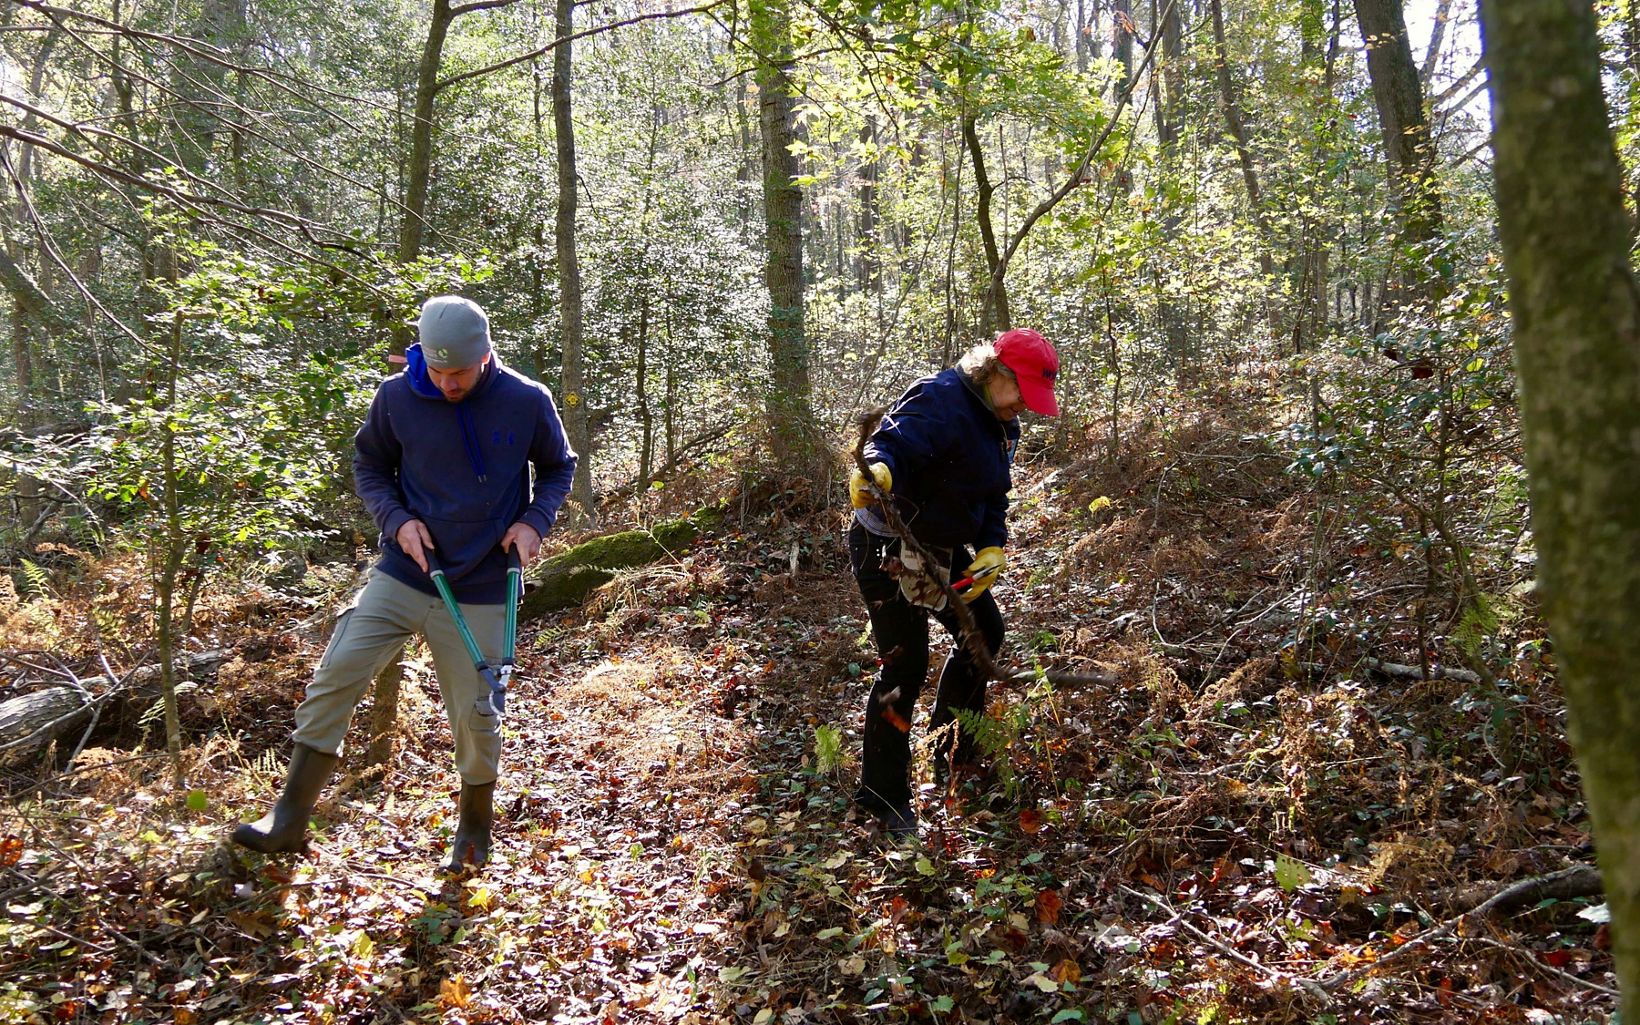 Dave Ray and Carol Pauley, members of the Nassawango Stewardship Committee, work along a section of trail during a preserve workday.